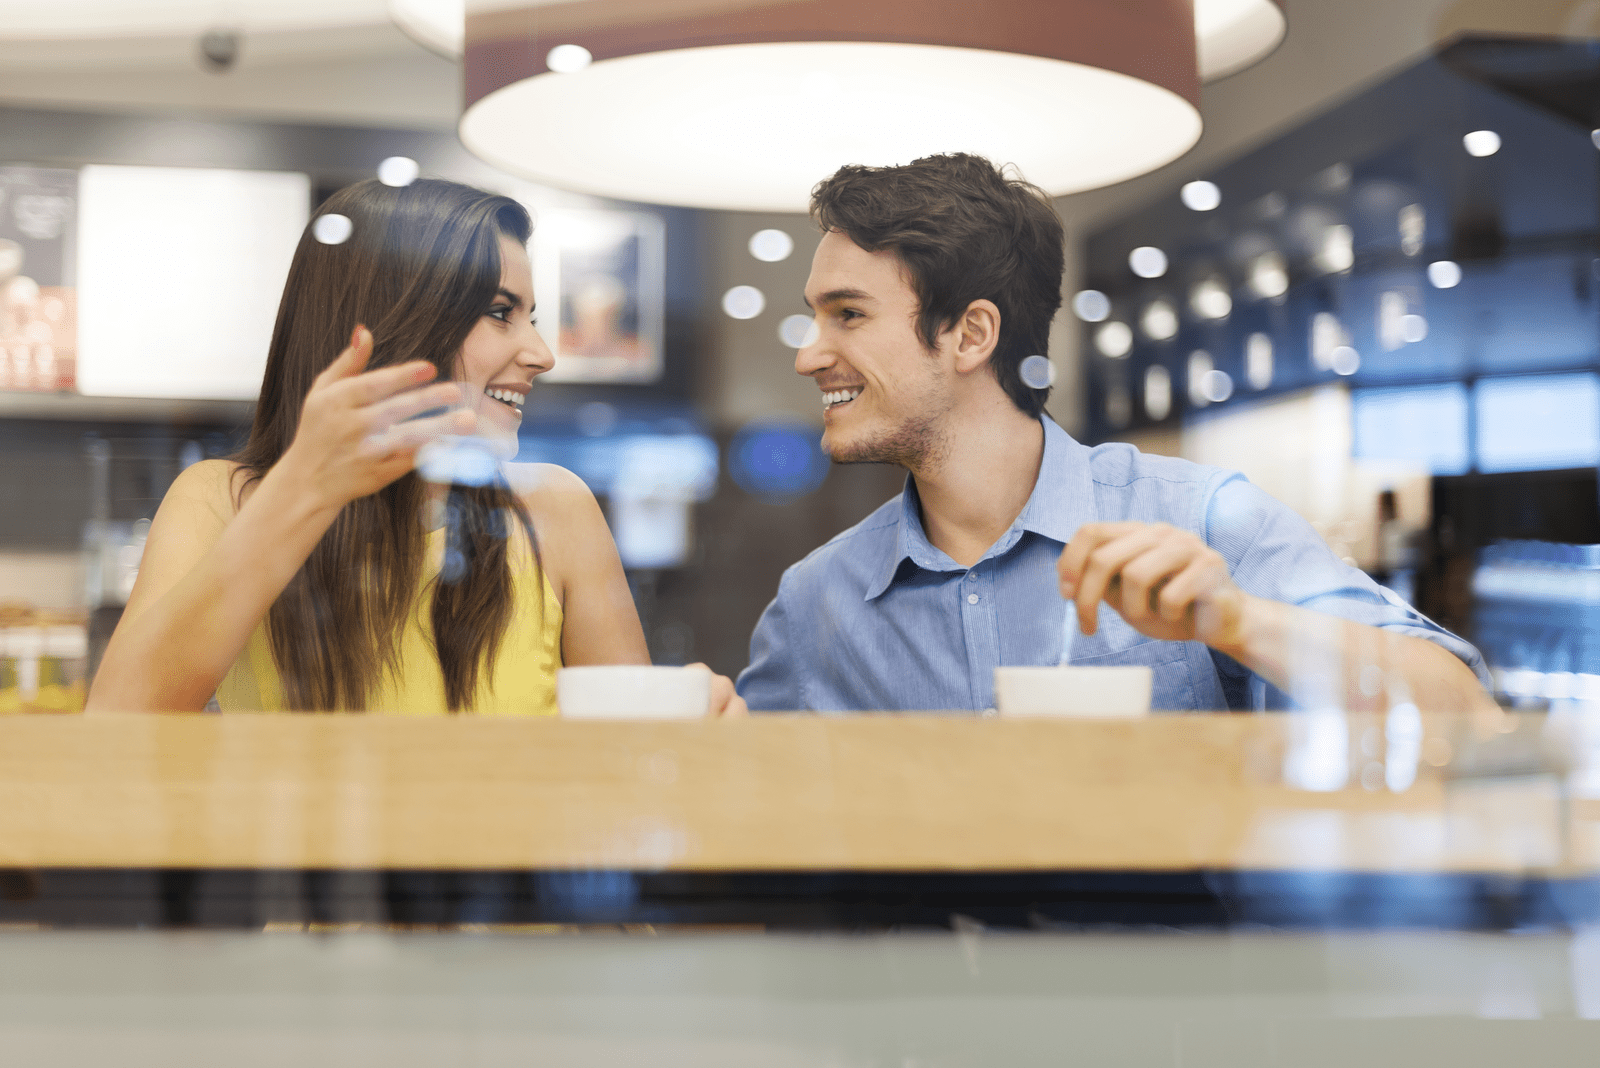 a smiling man and woman sit at a table and drink coffee